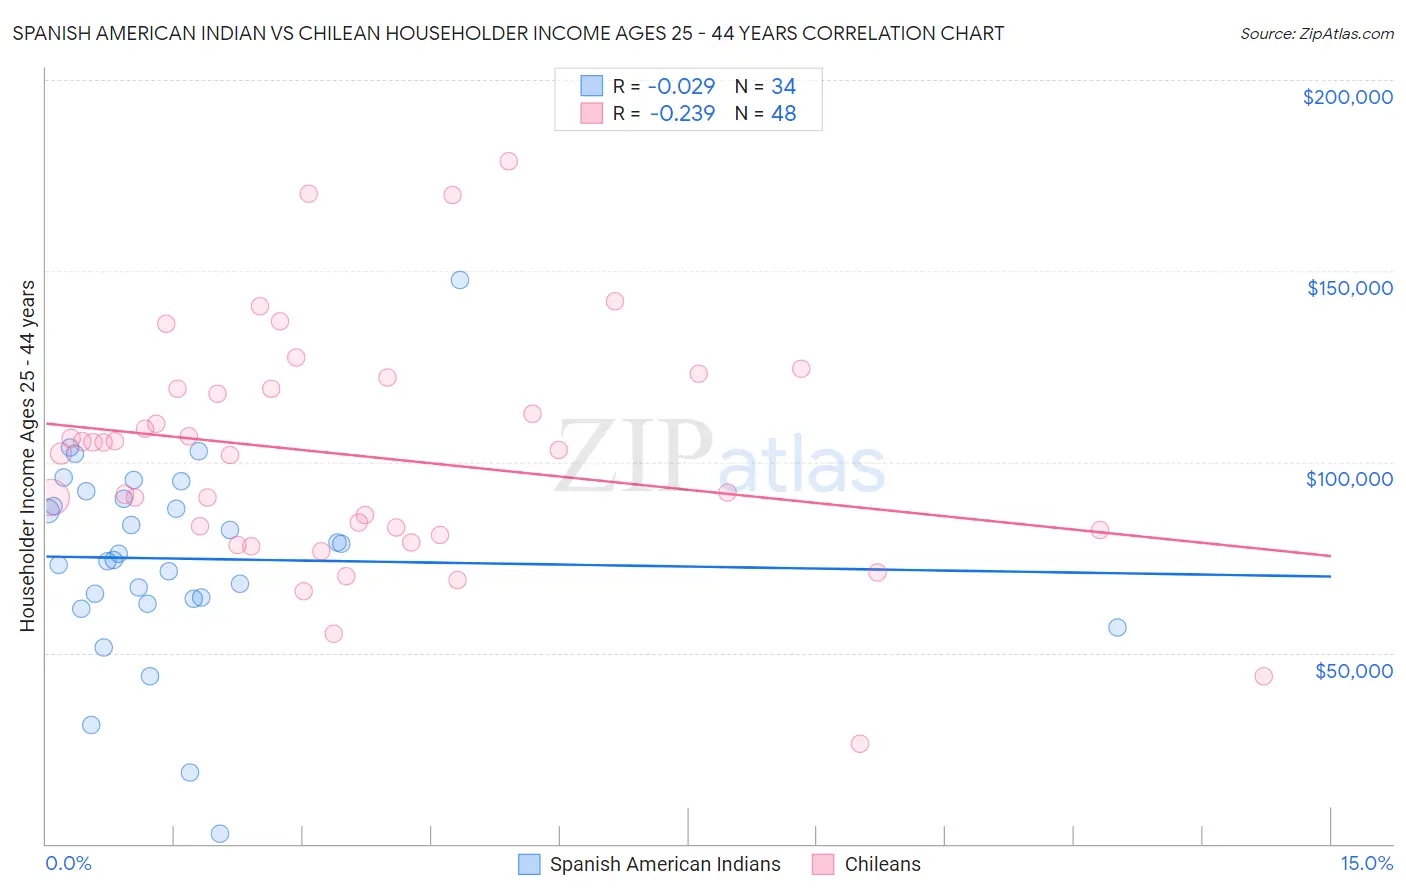 Spanish American Indian vs Chilean Householder Income Ages 25 - 44 years